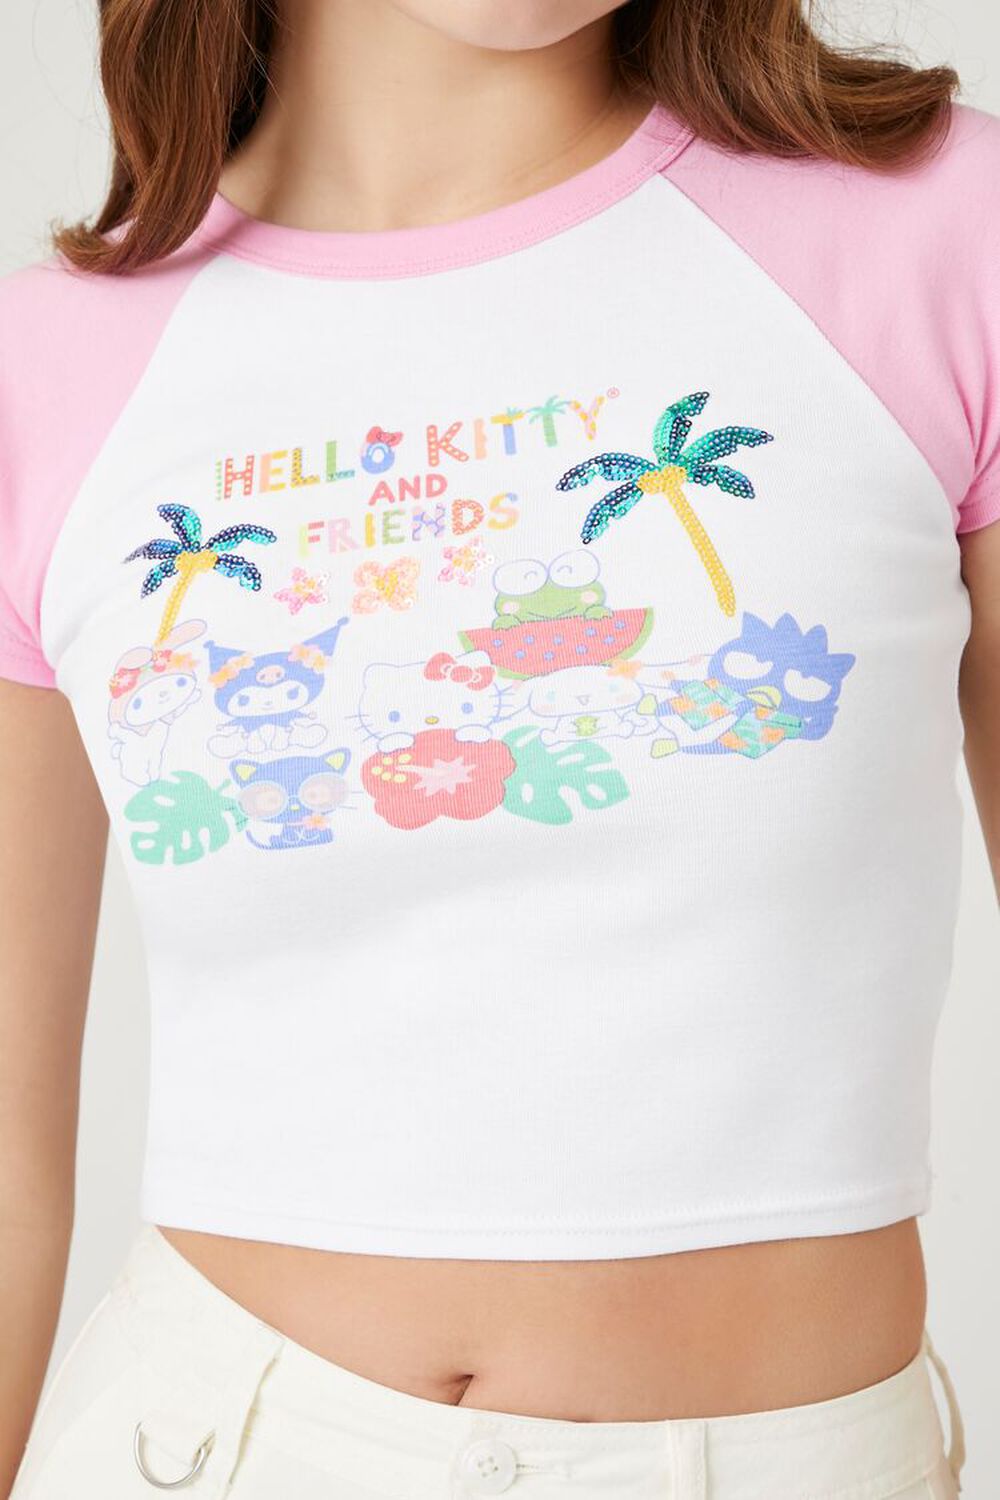 Hello kitty forever 21 tops  Hello kitty clothes, Kitty clothes